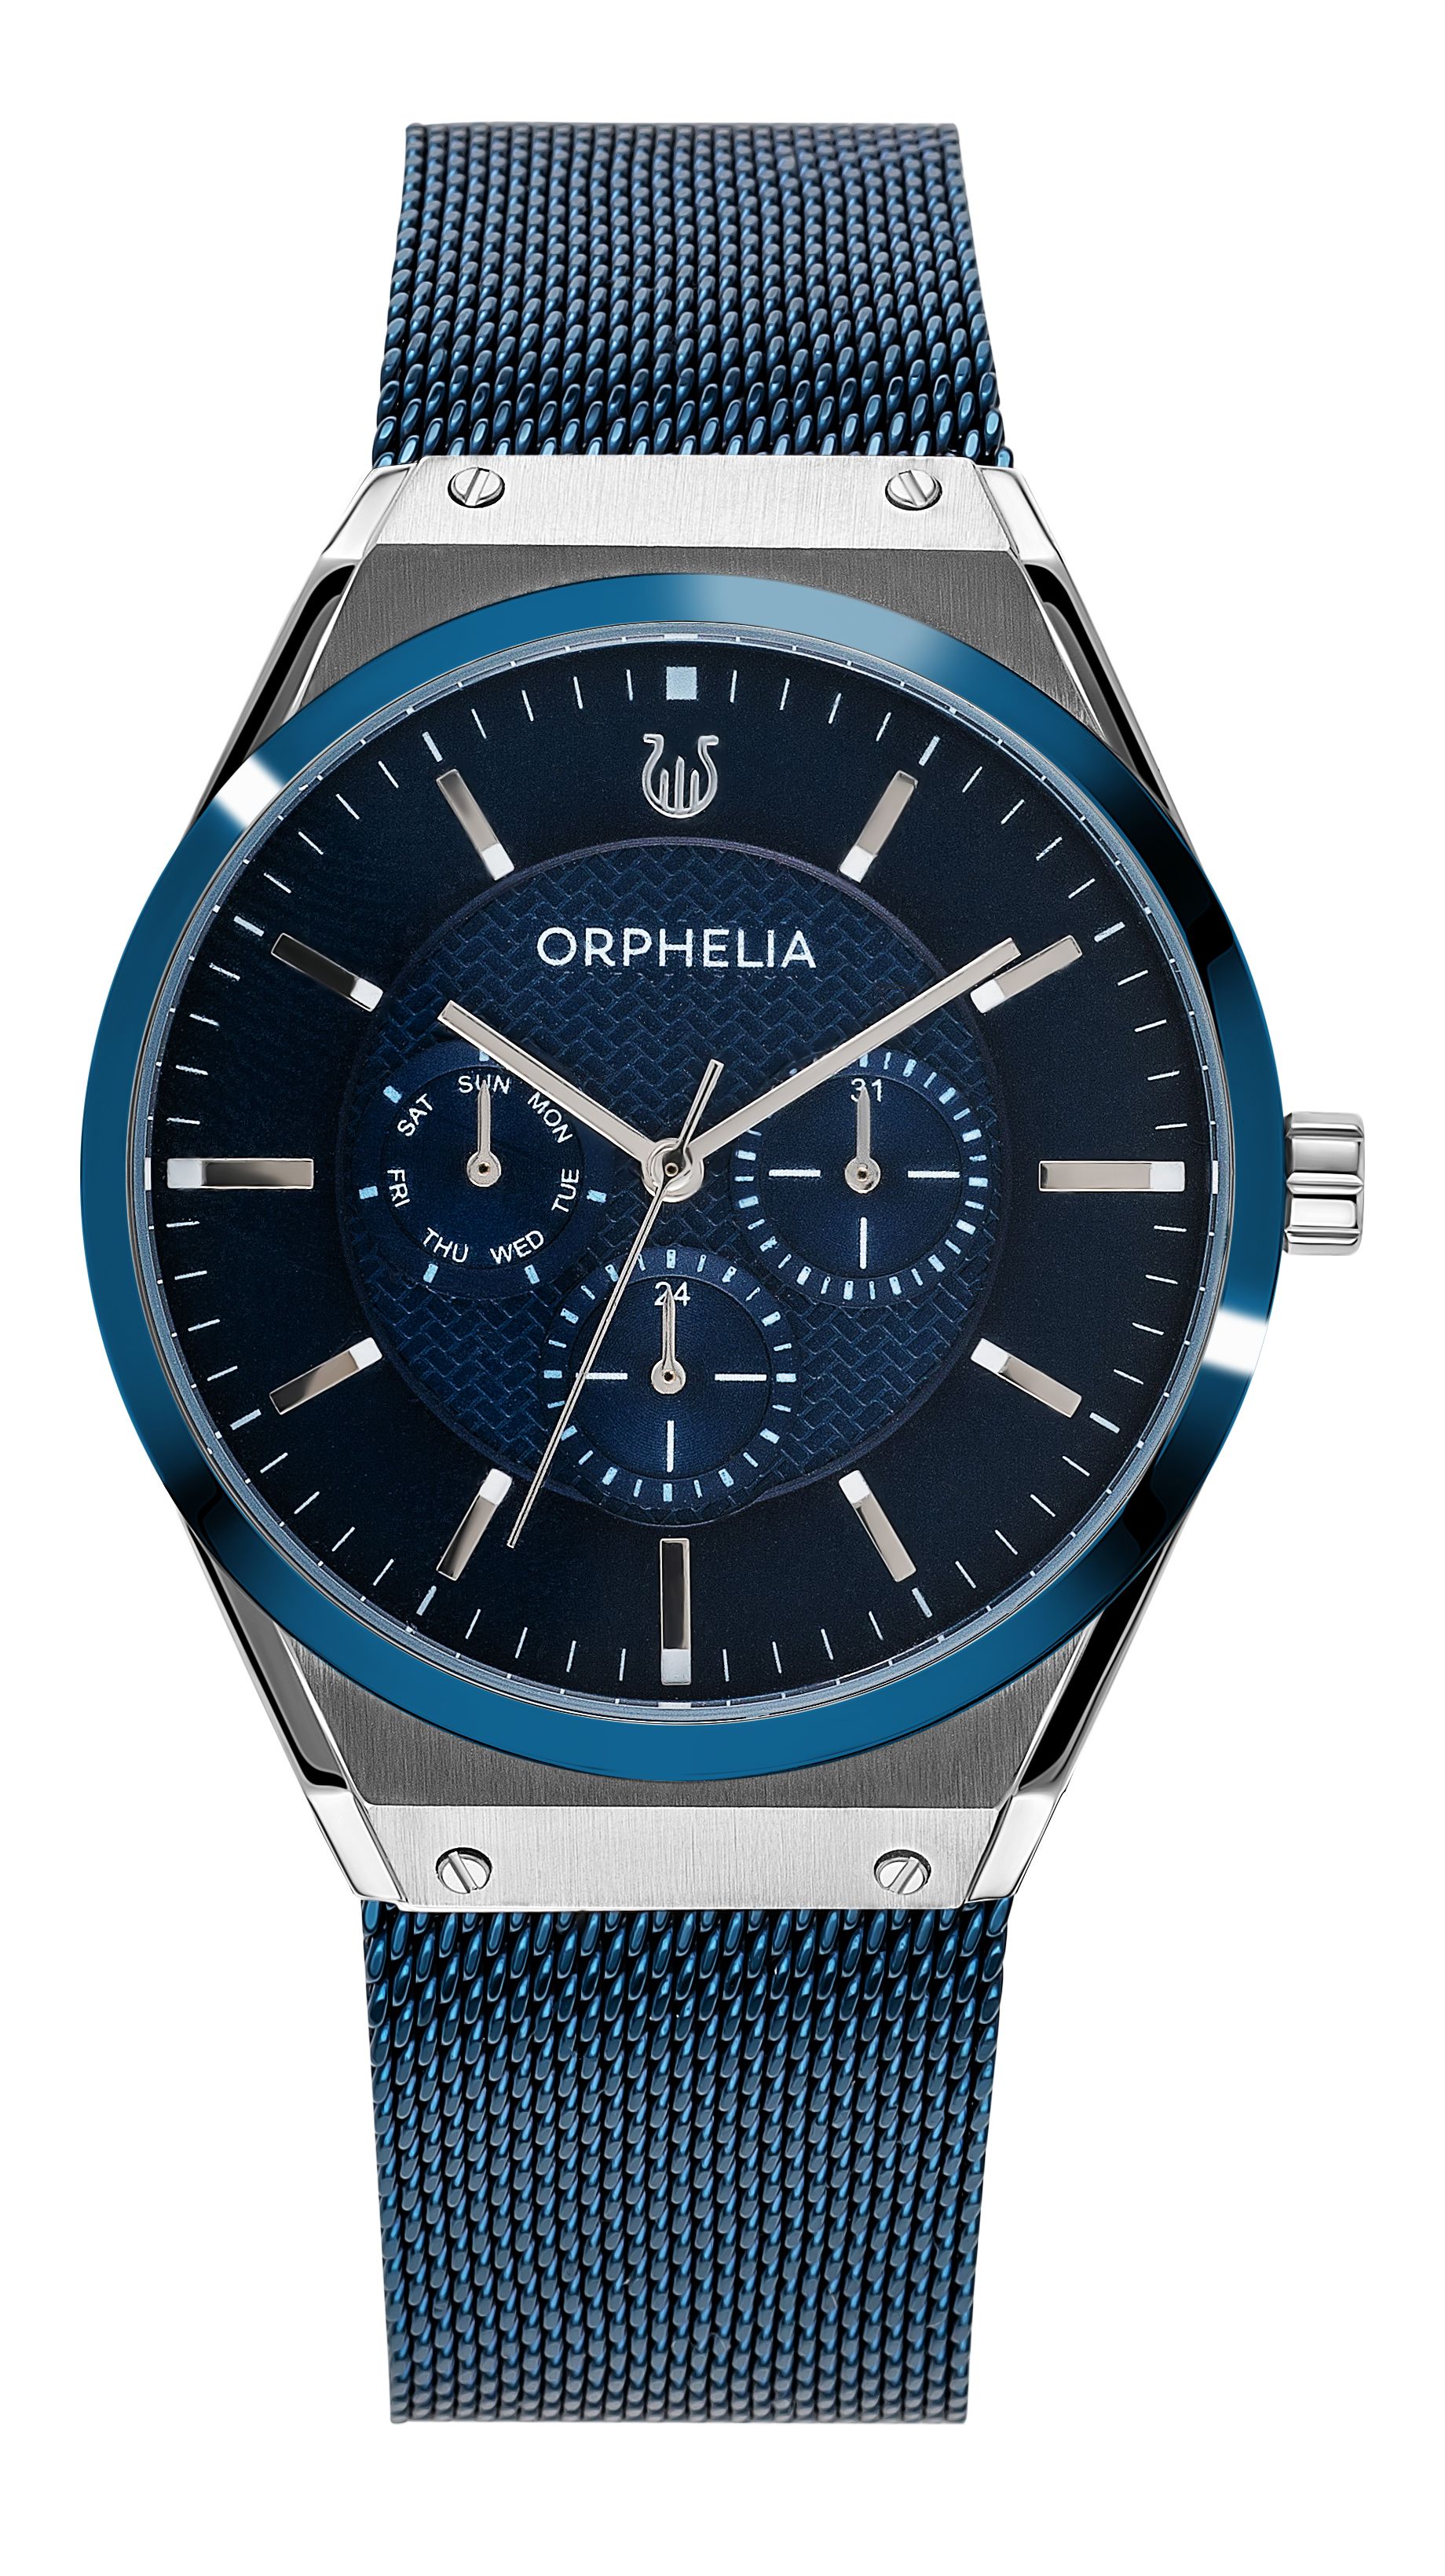 This Orphelia Saffiano Multi Dial Watch for Men is the perfect timepiece to wear or to gift. It's Silver 41 mm Round case combined with the comfortable Blue Stainless steel watch band will ensure you enjoy this stunning timepiece without any compromise. Operated by a high quality Quartz movement and water resistant to 3 bars, your watch will keep ticking. GREAT DESIGN: ORPHELIA Saffiano Multi dial  watch with a Miyota Quartz movement includes a date display and has a mesh band. This watch features a 24 hour display. Perfect for parties, date nights and wearing in the office. PREMIUM QUALITY: By using high-quality materials  Glass: Mineral Glass  Case material: Stainless steel  Bracelet material: Stainless steel- Water resistant: 3 bars COMPACT SIZE: Case diameter: 41 mm  Height: 9 mm  Strap- Length: 22 cm  Width: 20 mm. Due to this practical handy size  the watch is absolutely for everyday use-Weight: 92 g